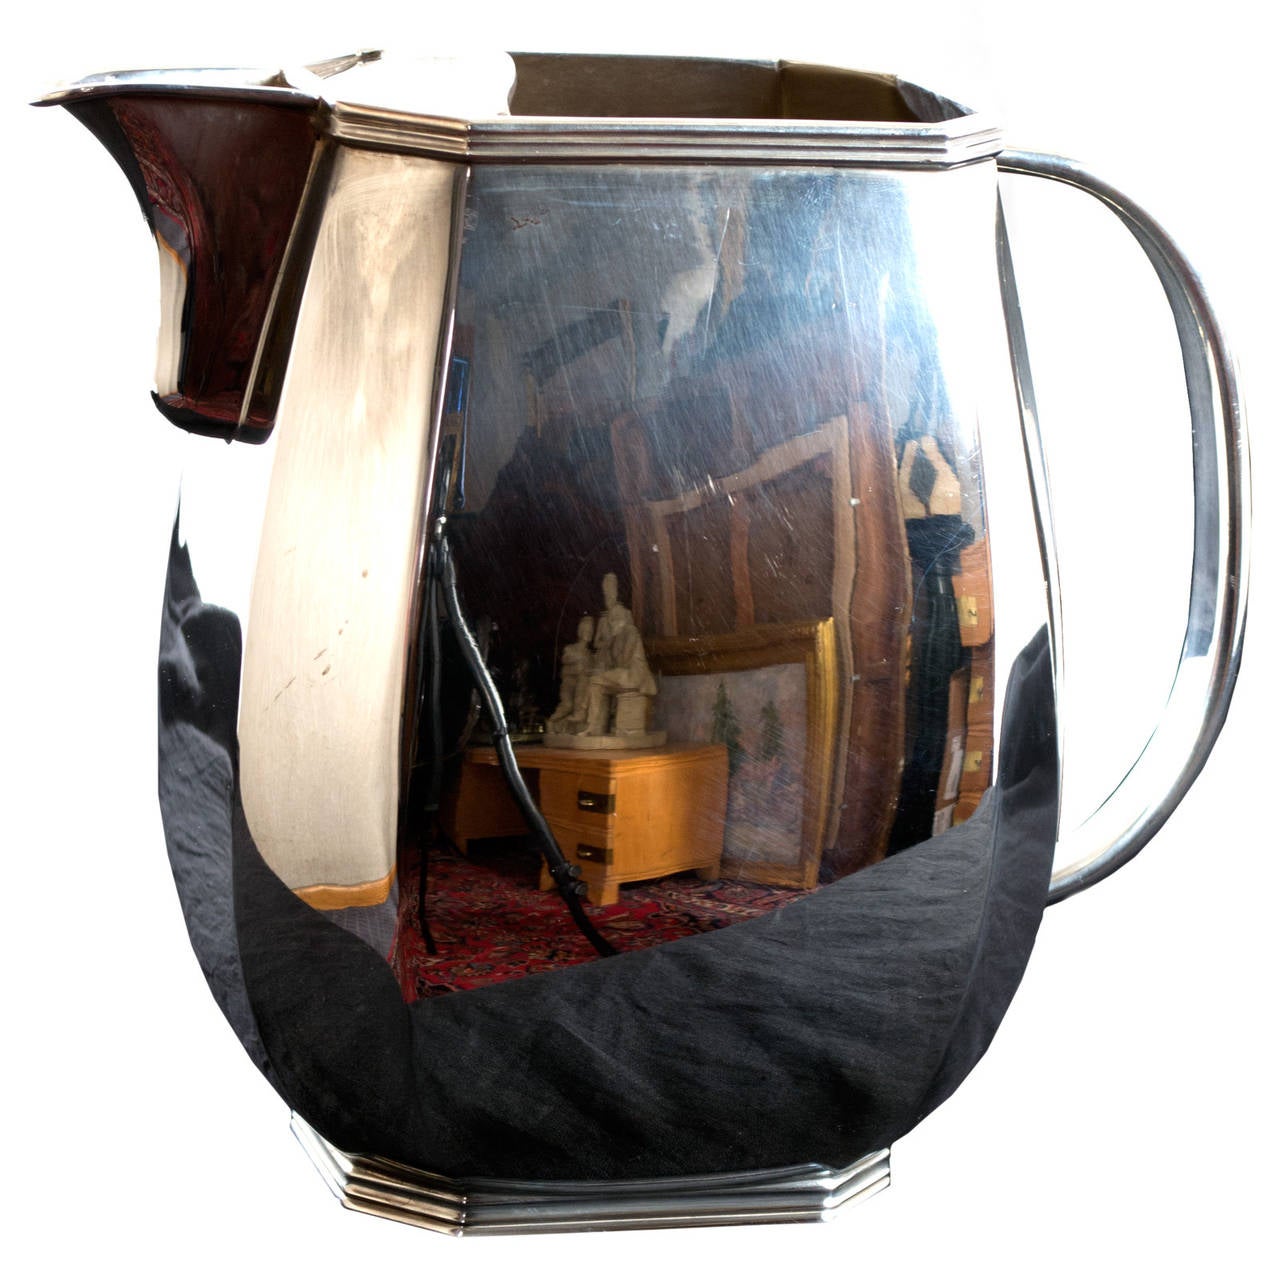 A late-nineteenth-century sterling silver pitcher made in England with markings on the bottom.